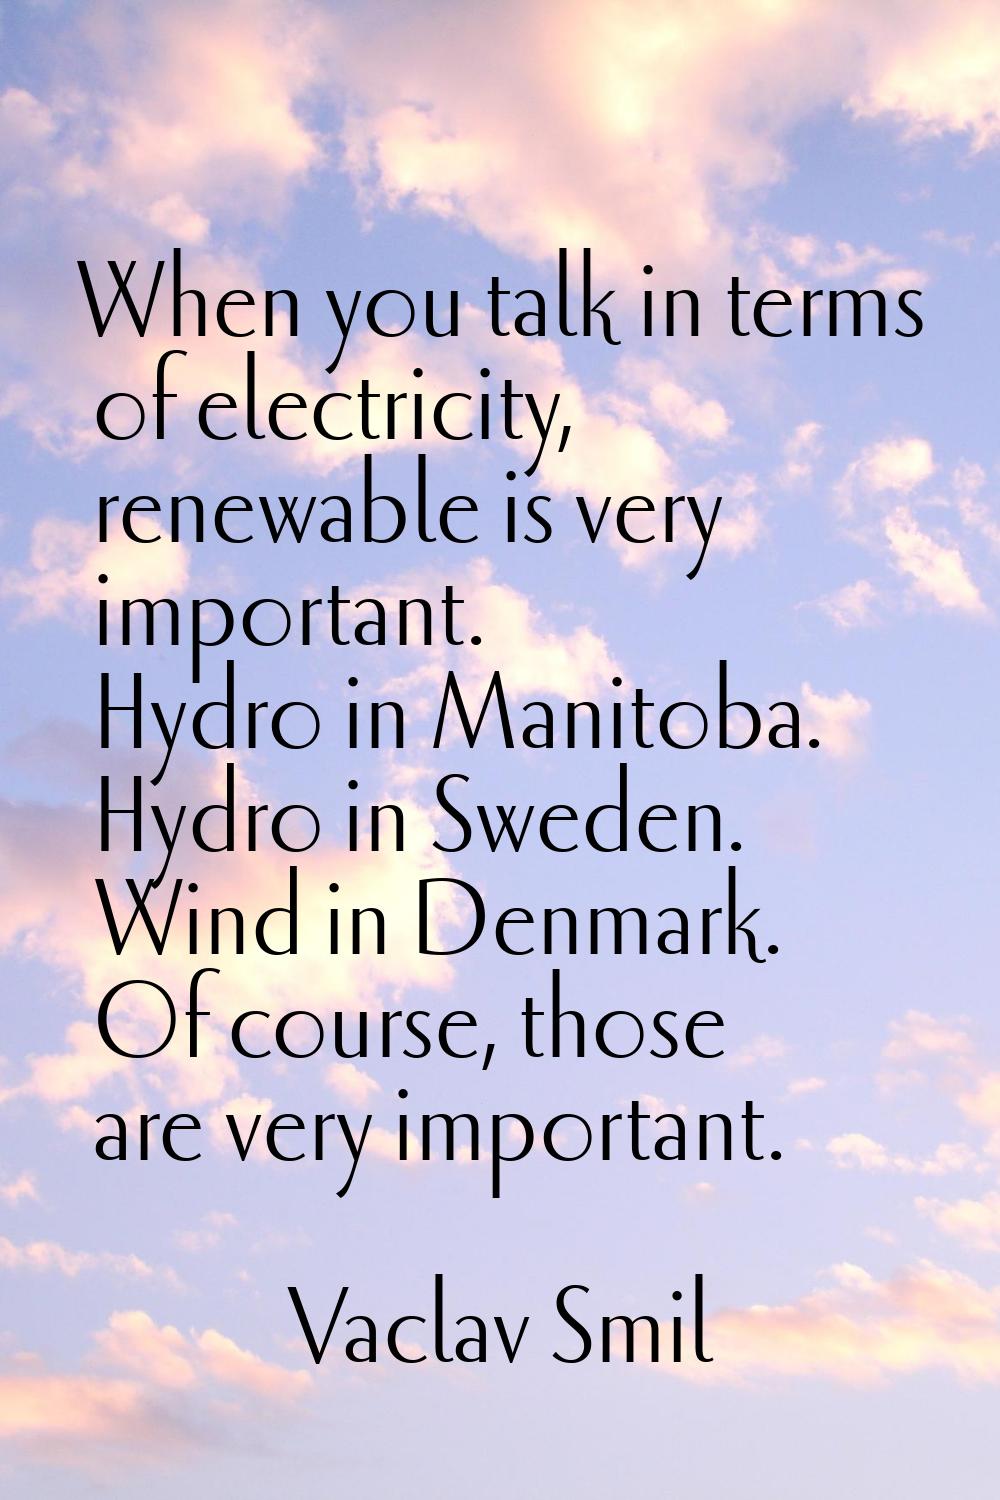 When you talk in terms of electricity, renewable is very important. Hydro in Manitoba. Hydro in Swe